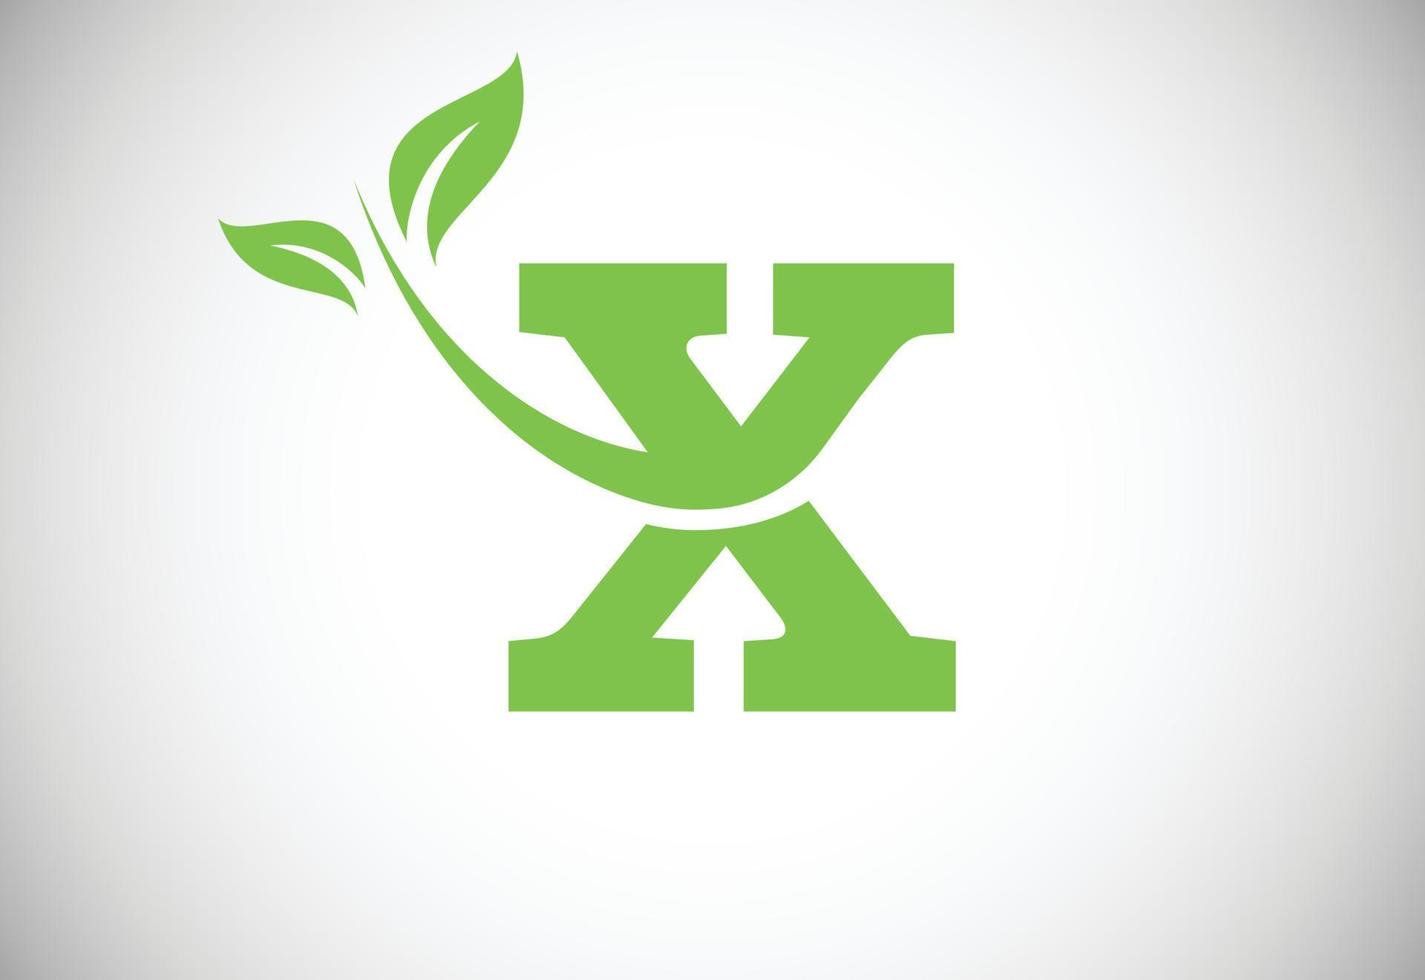 Initial letter X and leaf logo. Eco-friendly logo concept. Modern vector logo for ecological business and company identity